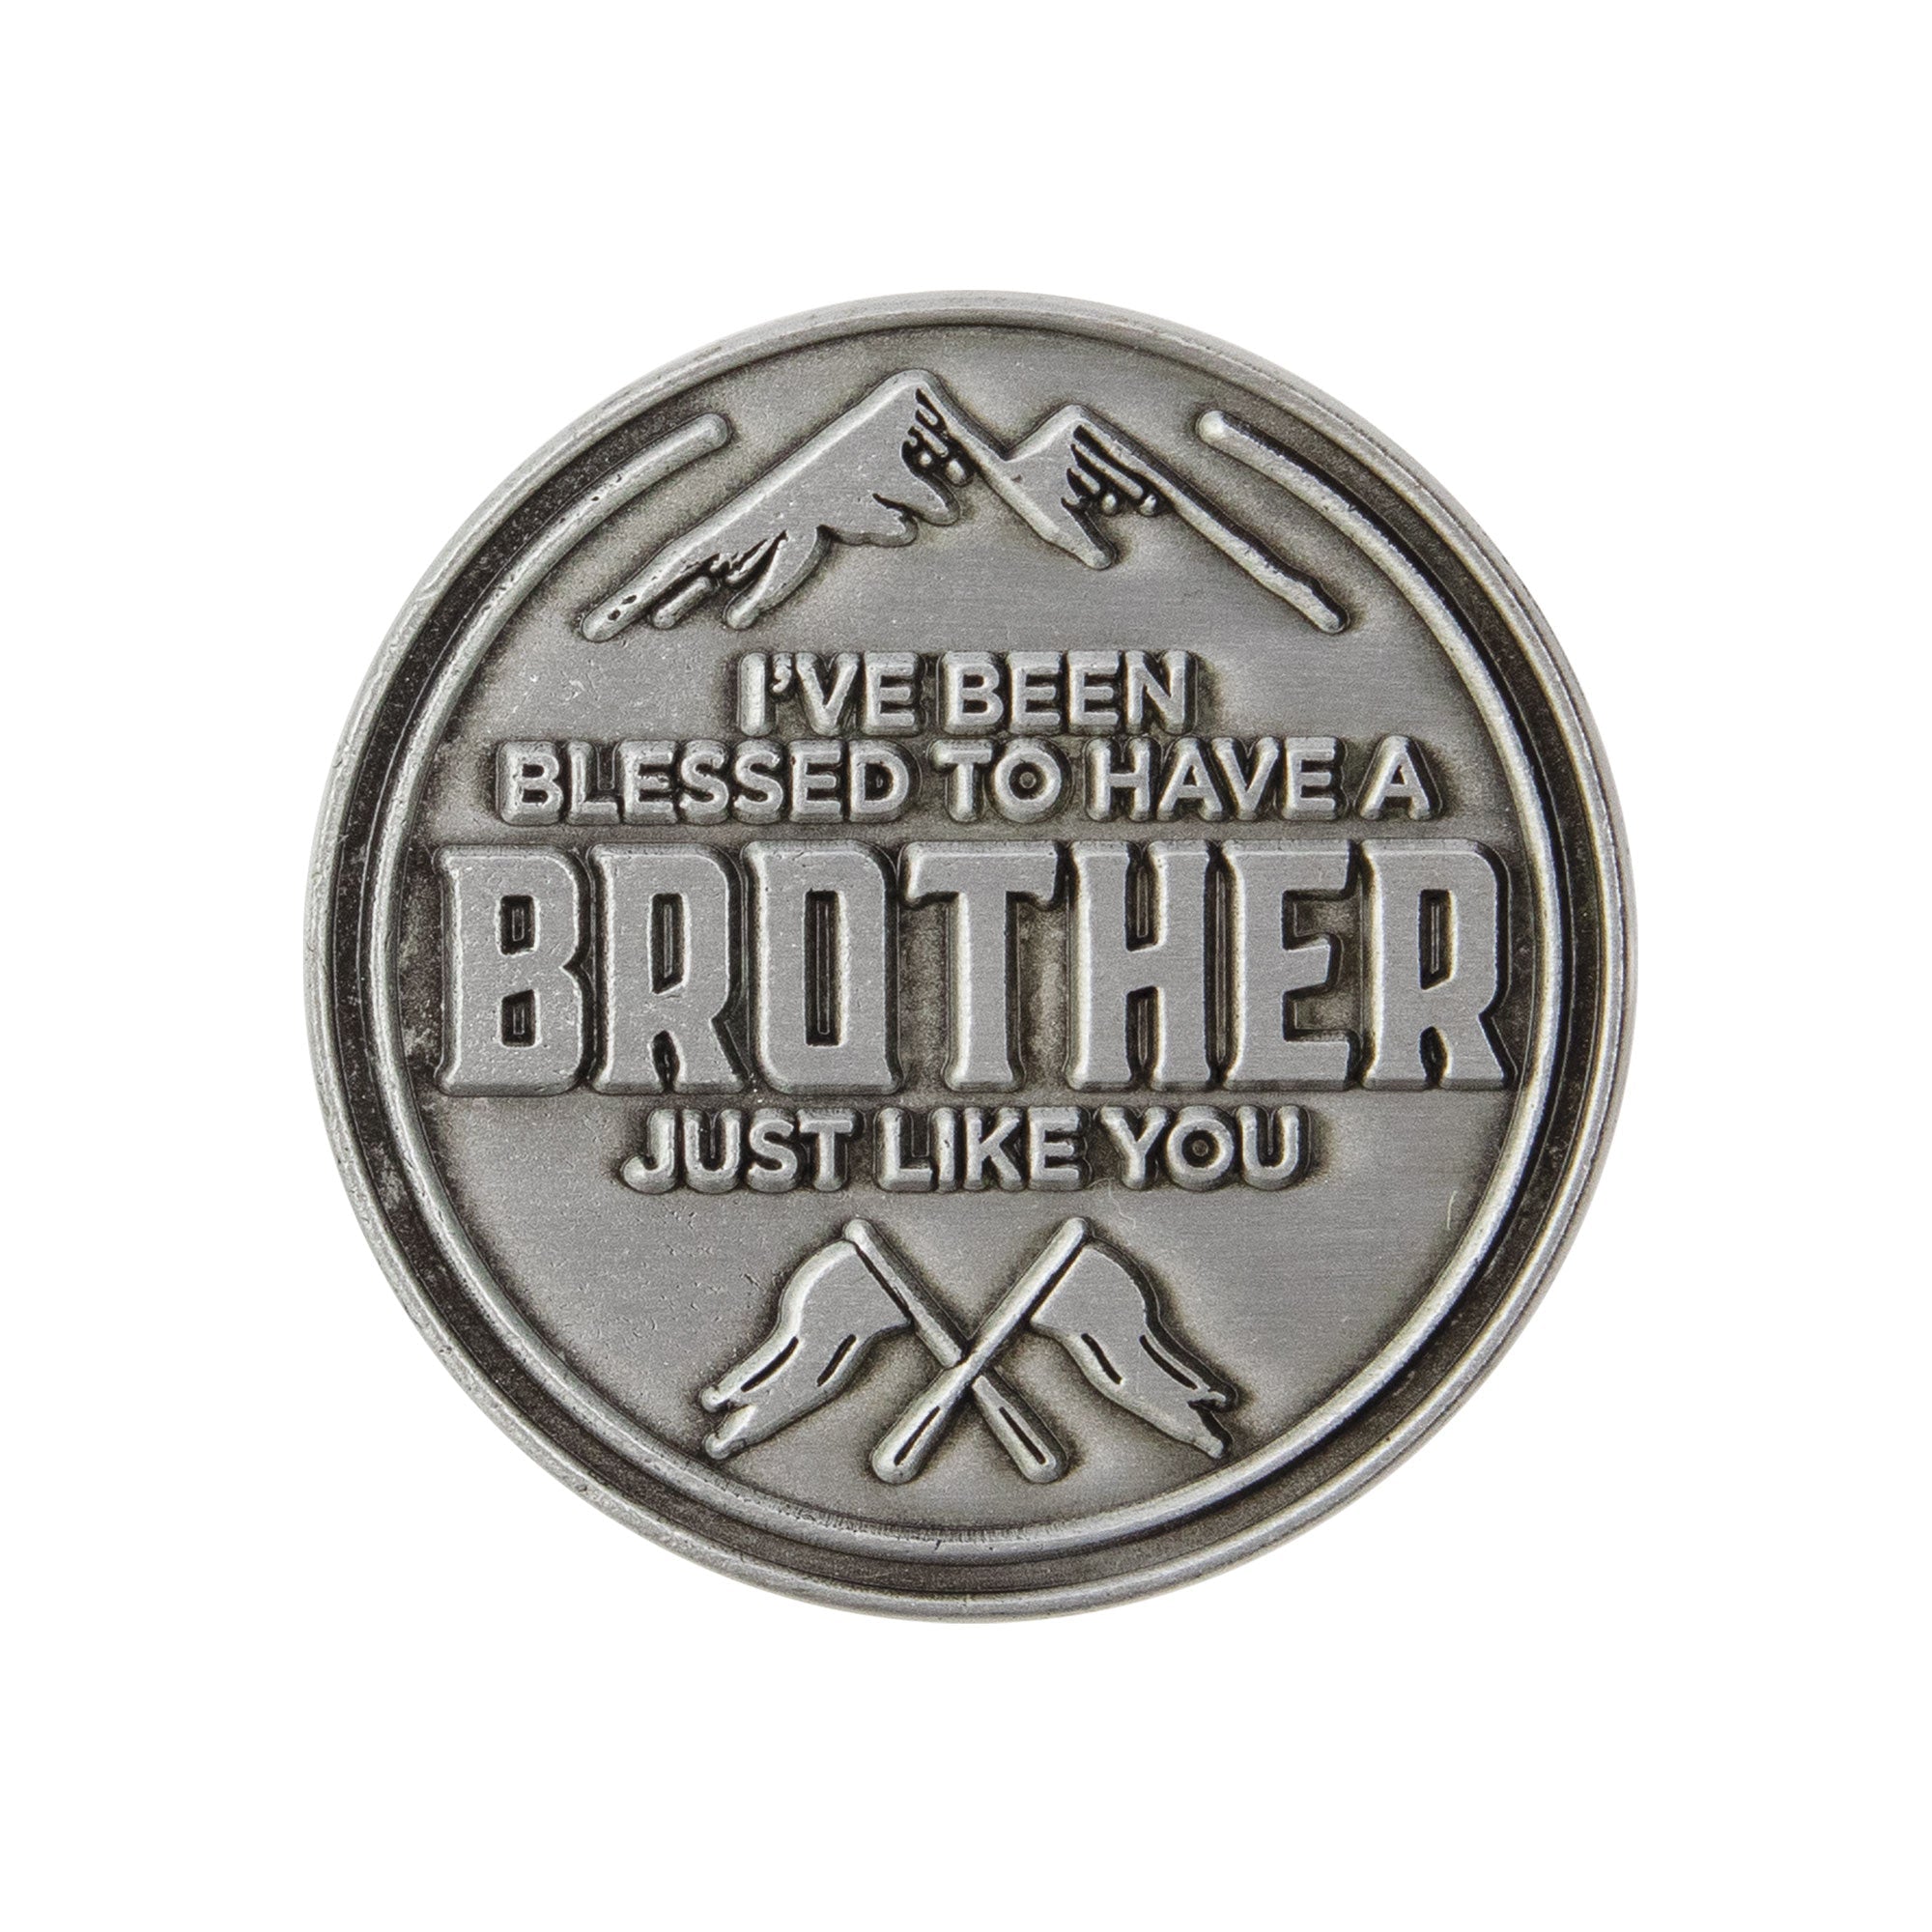 Brothers Gift, Family Love Expression Coin